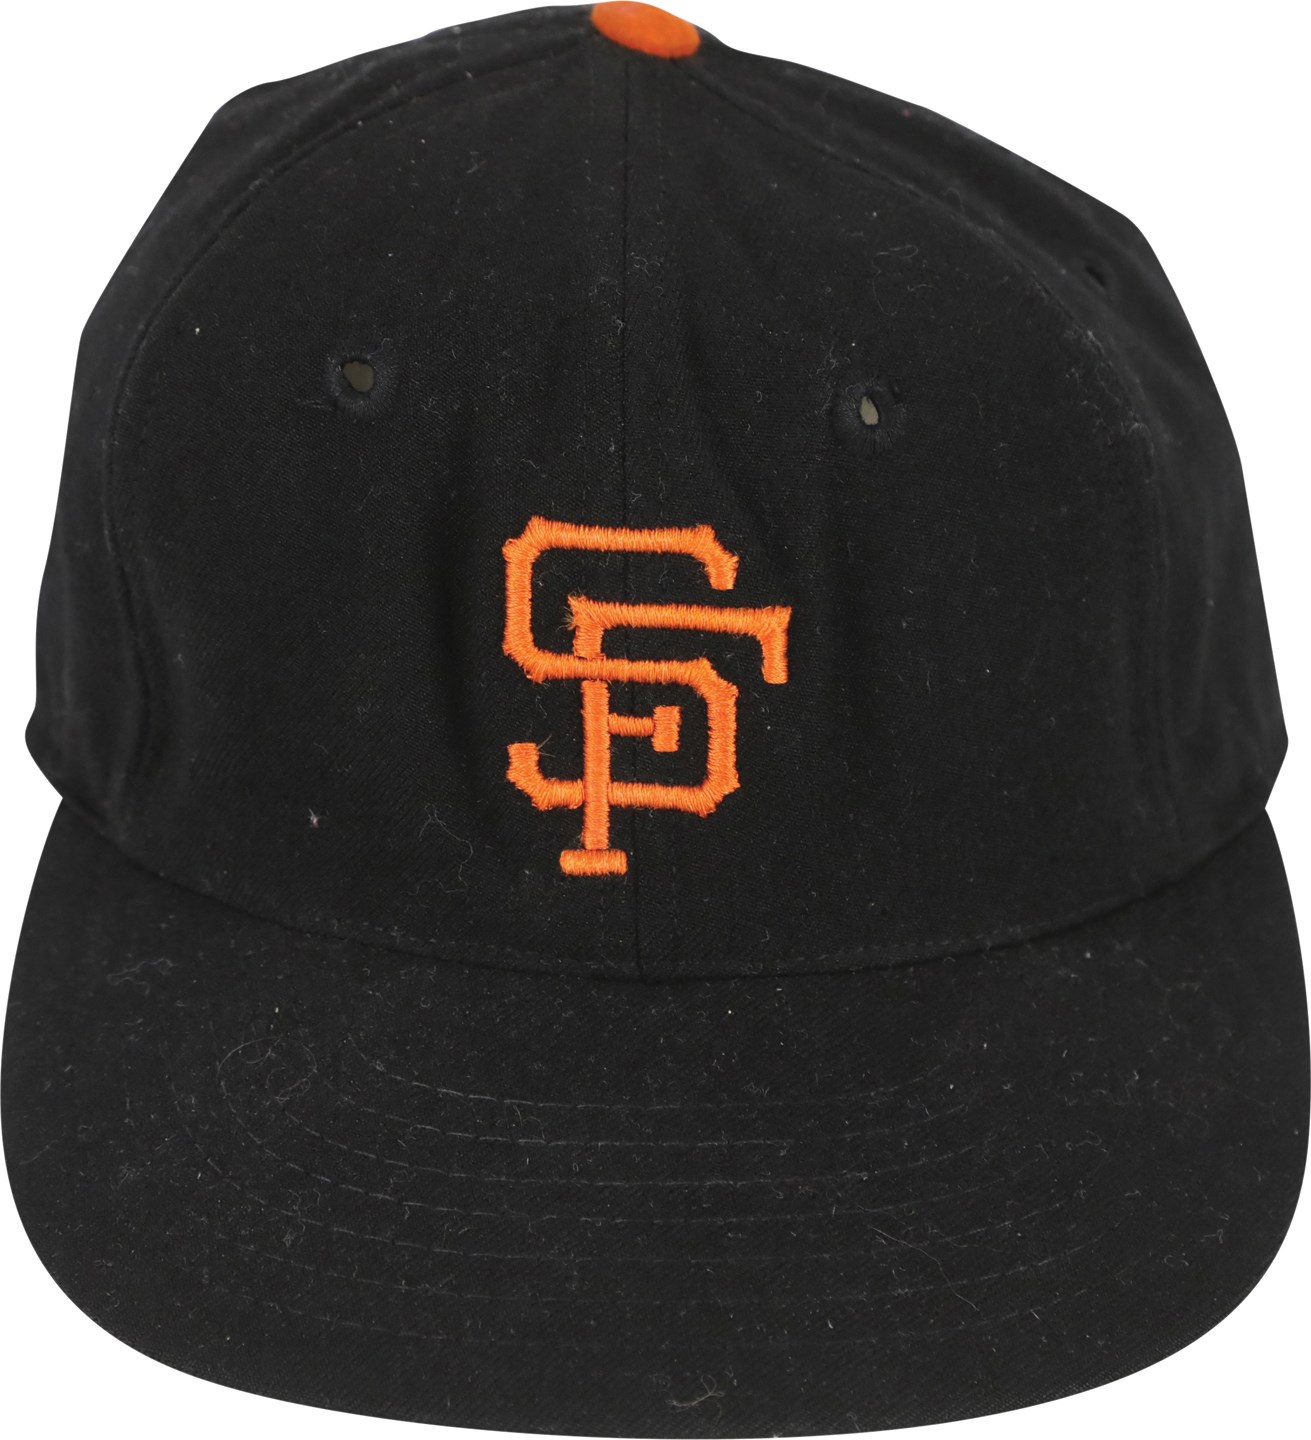 1960-67 San Francisco Giants Game Worn Hat Attributed to Willie Mays